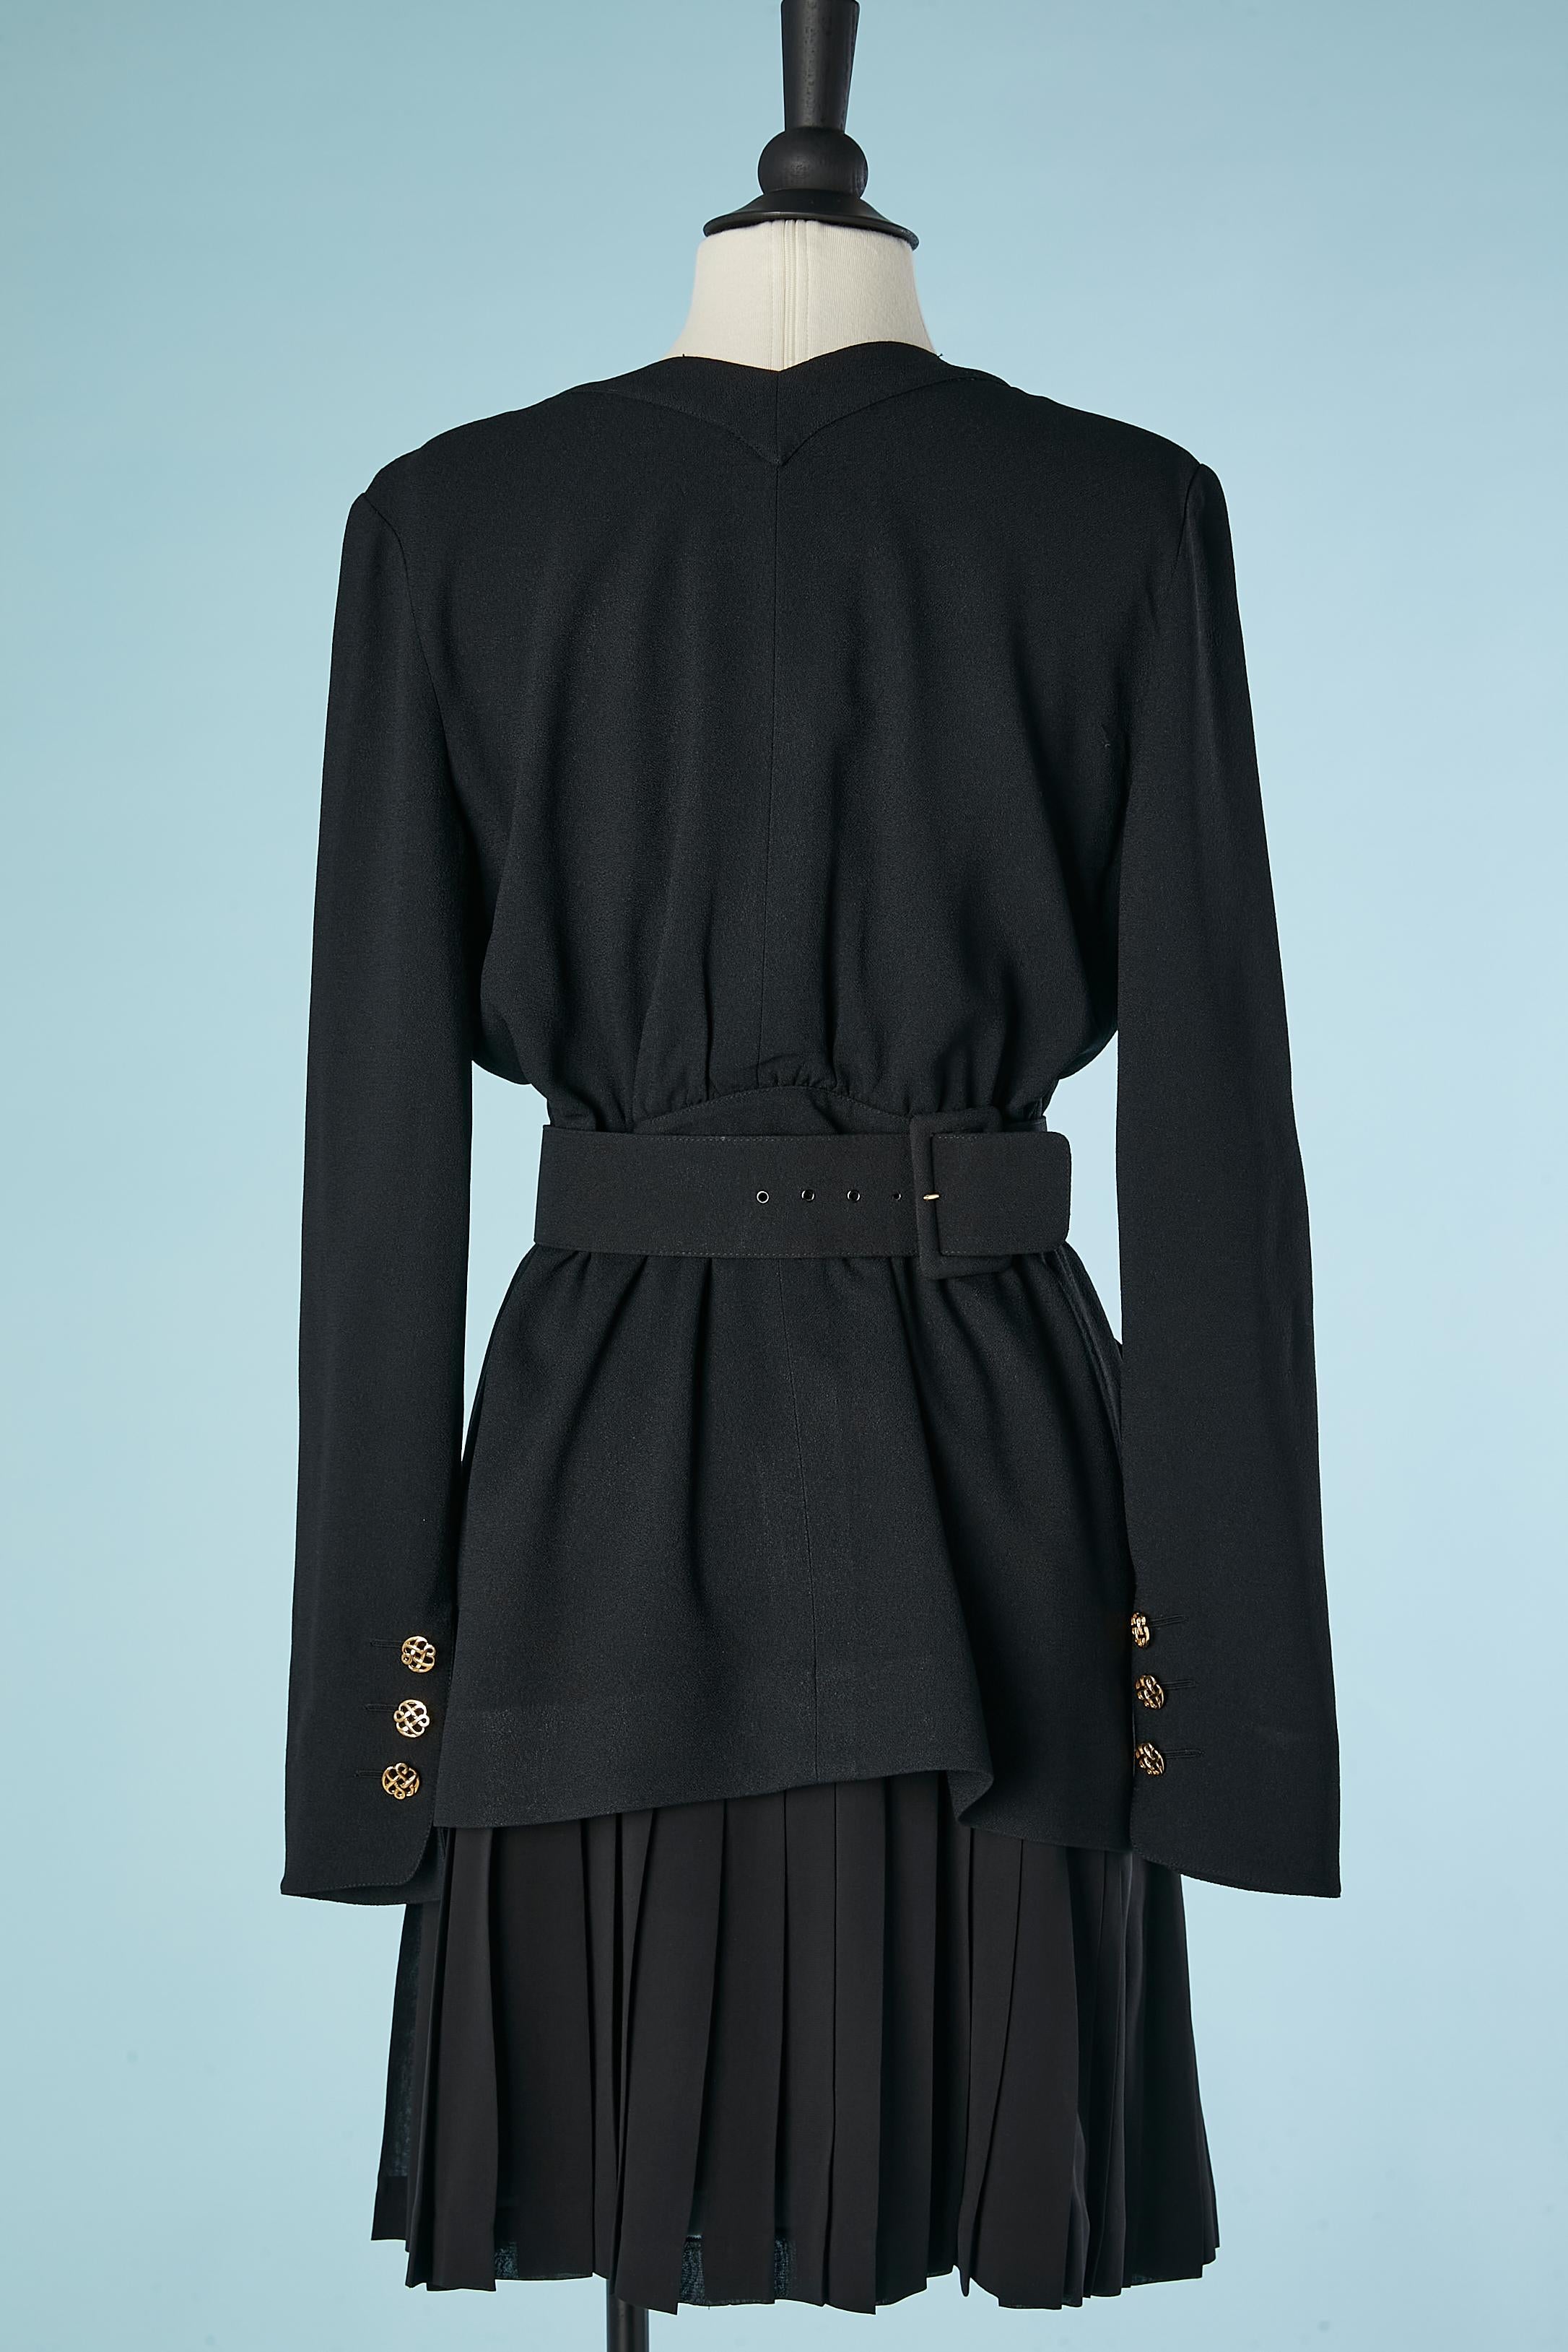 Crêpe & silk chiffon with gold buttons and belt skirt-suit Karl Lagerfeld  For Sale 2